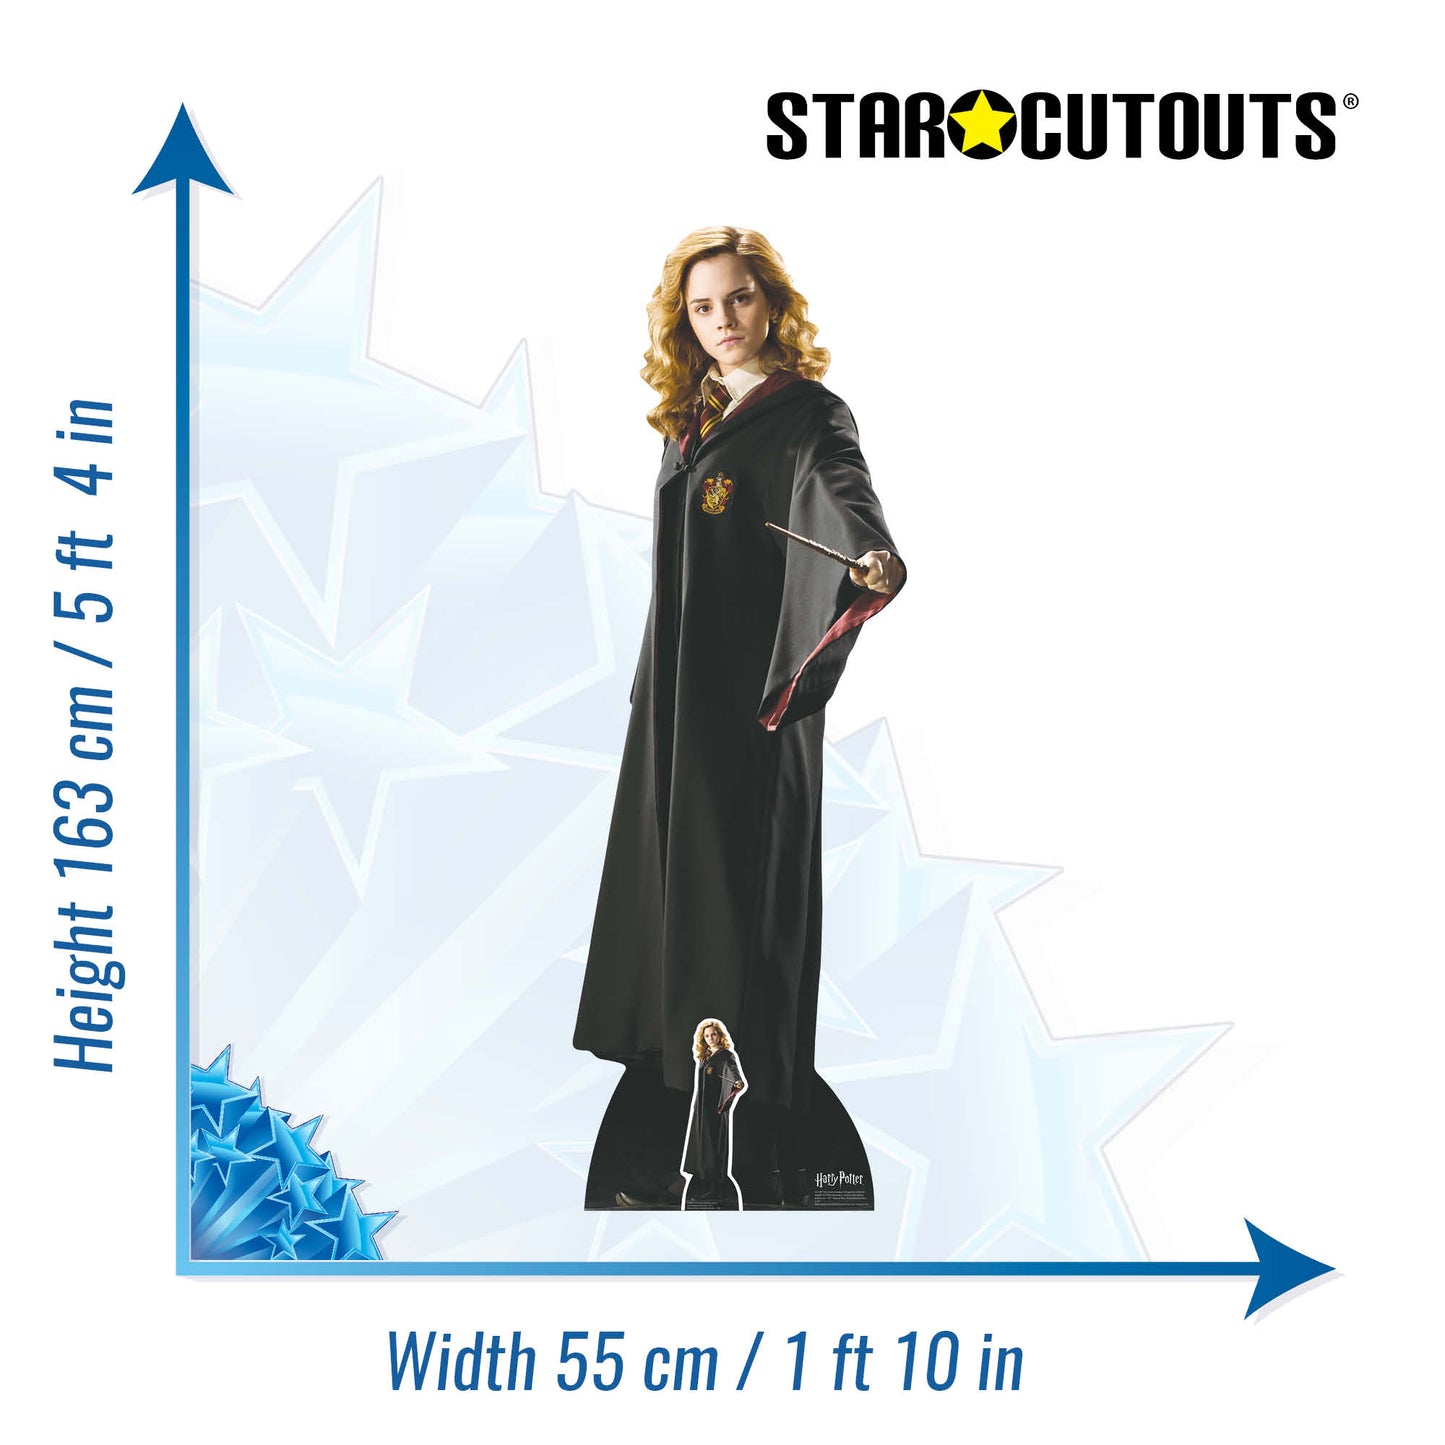 SC1087 Hermione Granger Hogwarts School of Witchcraft and Wizardry Uniform Cardboard Cut Out Height 163cm